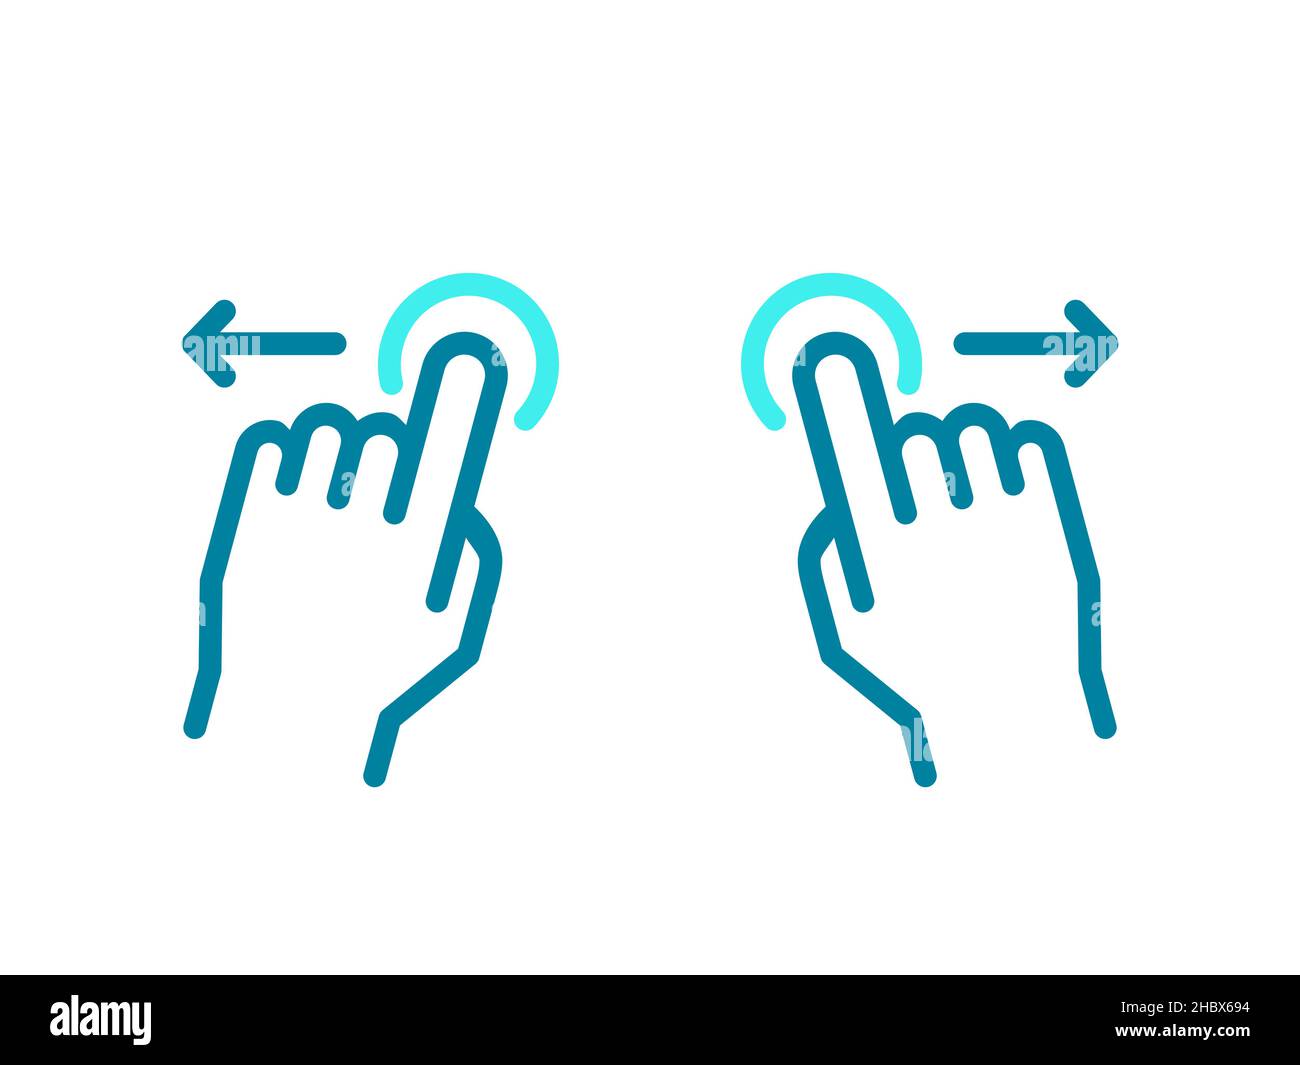 Swipe gesture line icon. Two hands zoom out touch screen. Mobile phone or tablet interface. Slide right and left. Horizontal swipe magnify movement. Stock Vector